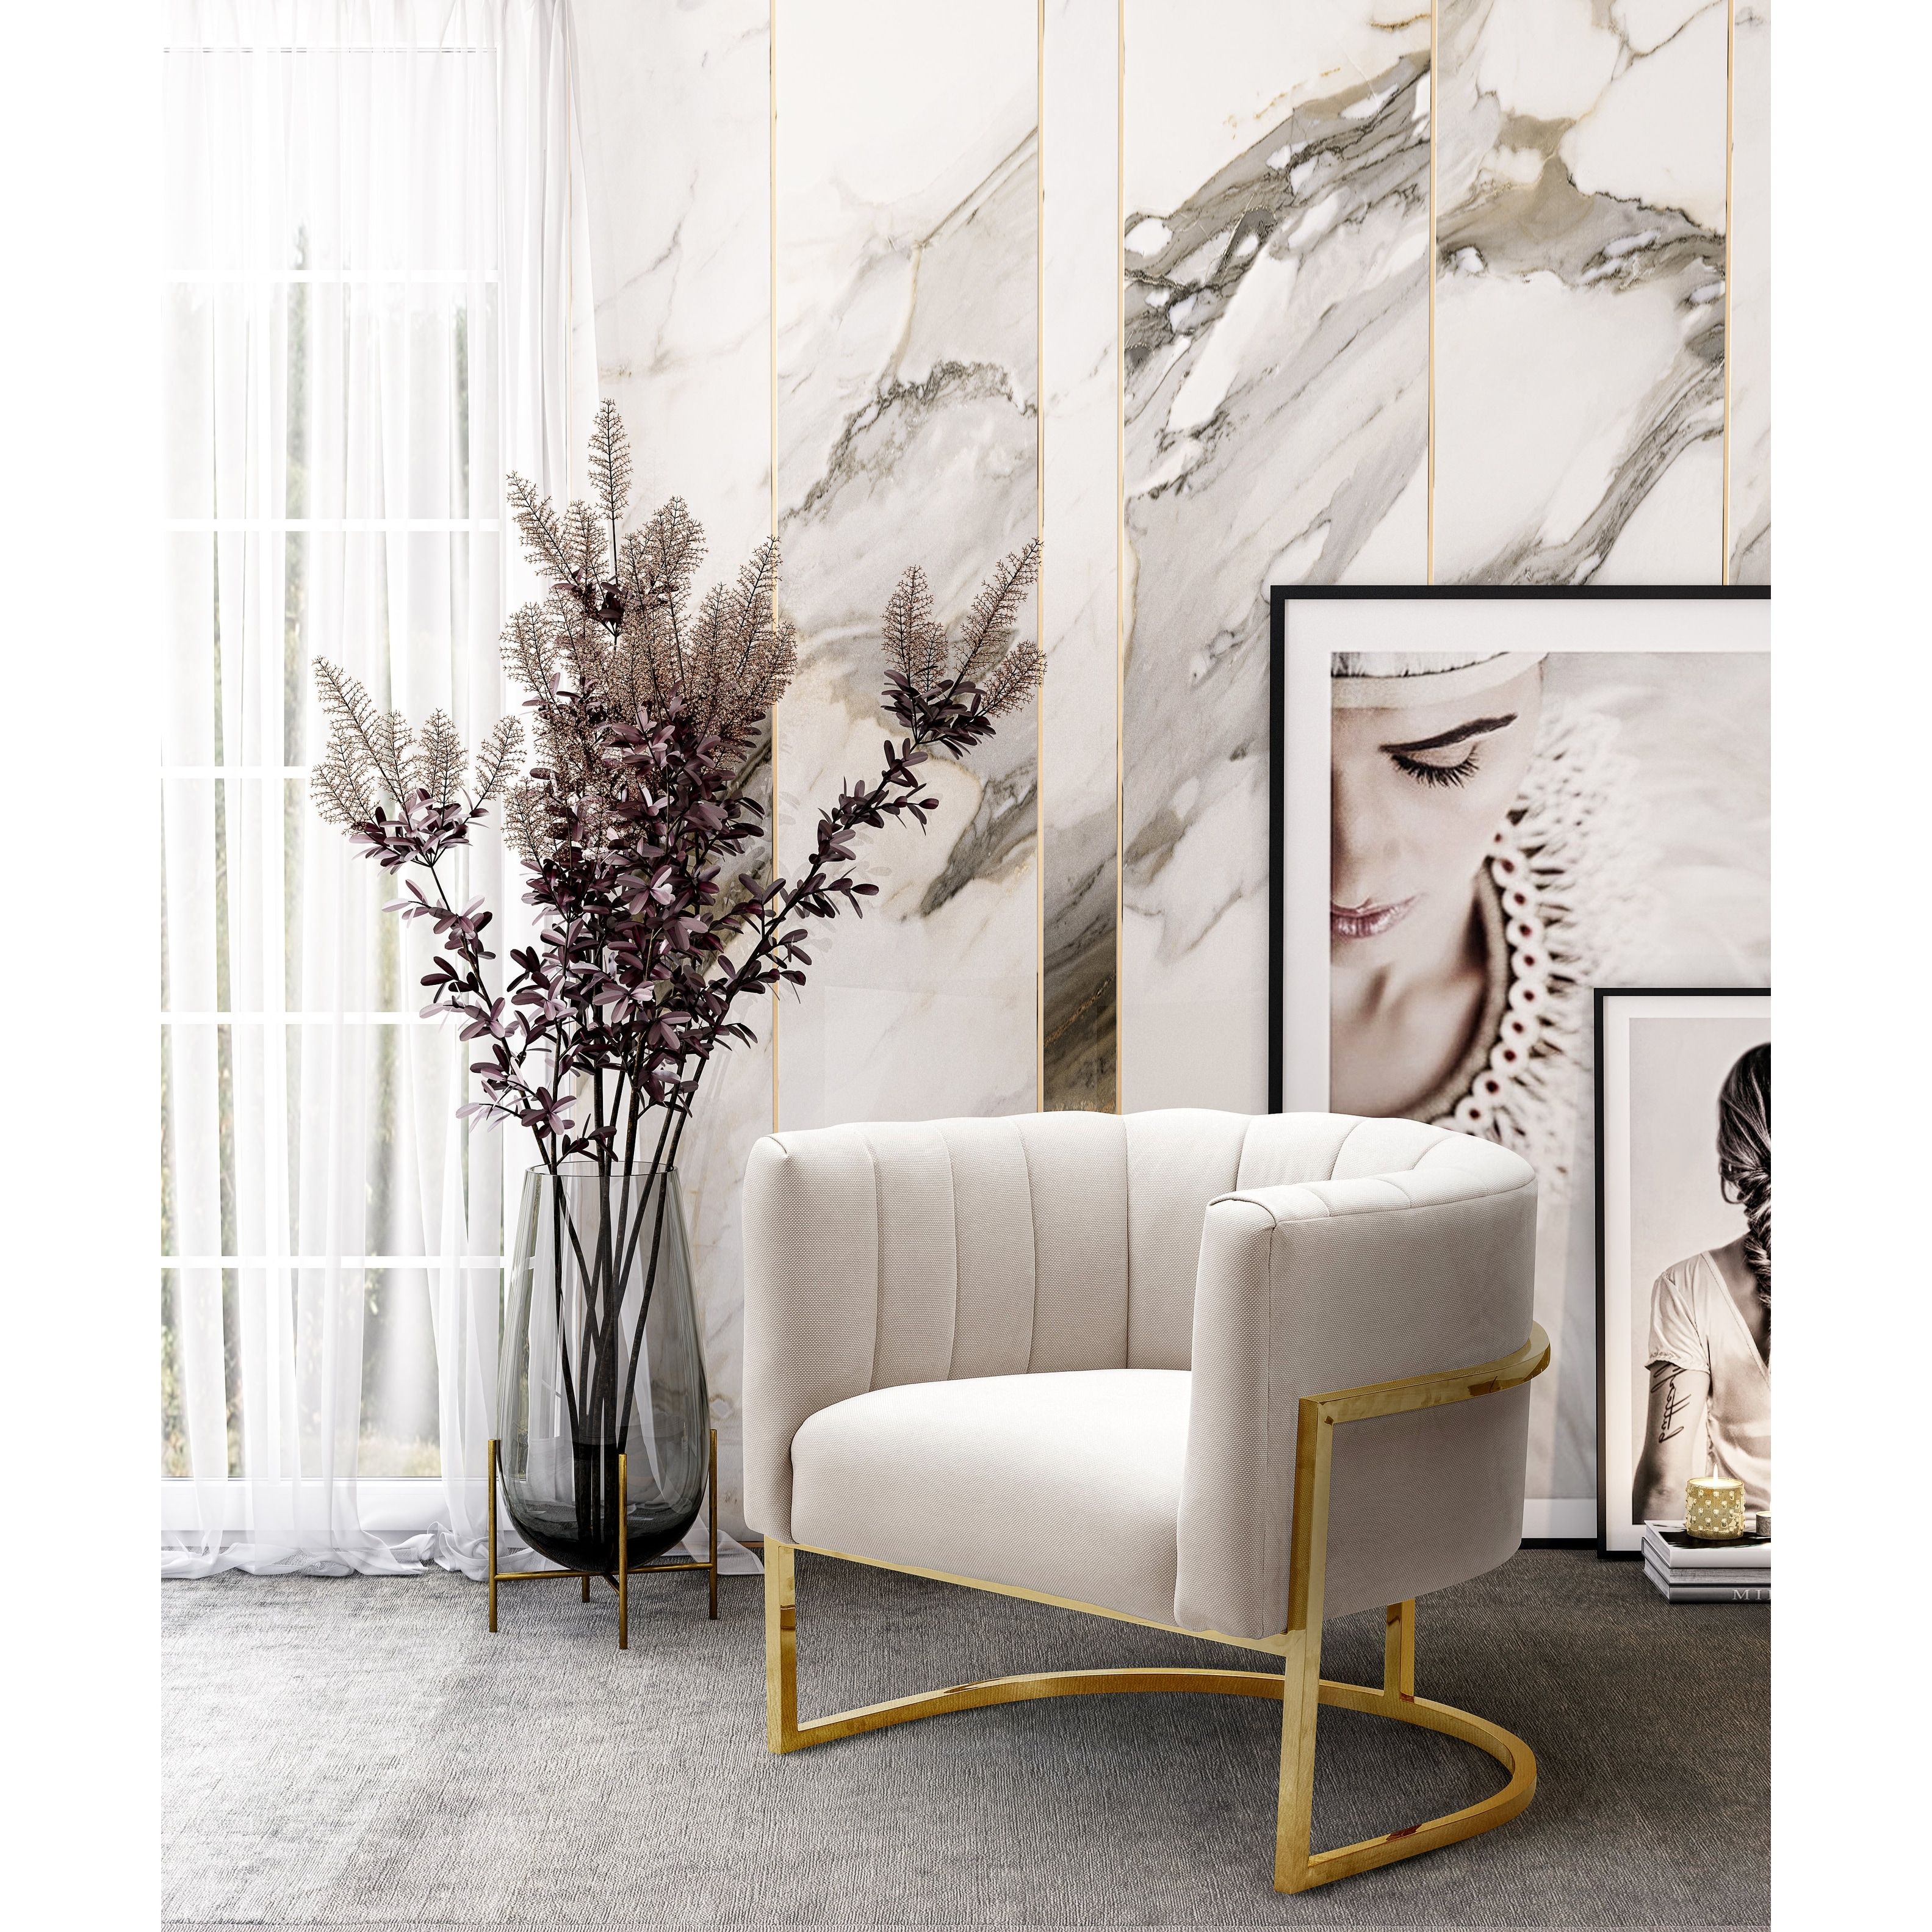 Magnolia Spotted Cream Chair with Gold Base - Walmart.com | Walmart (US)